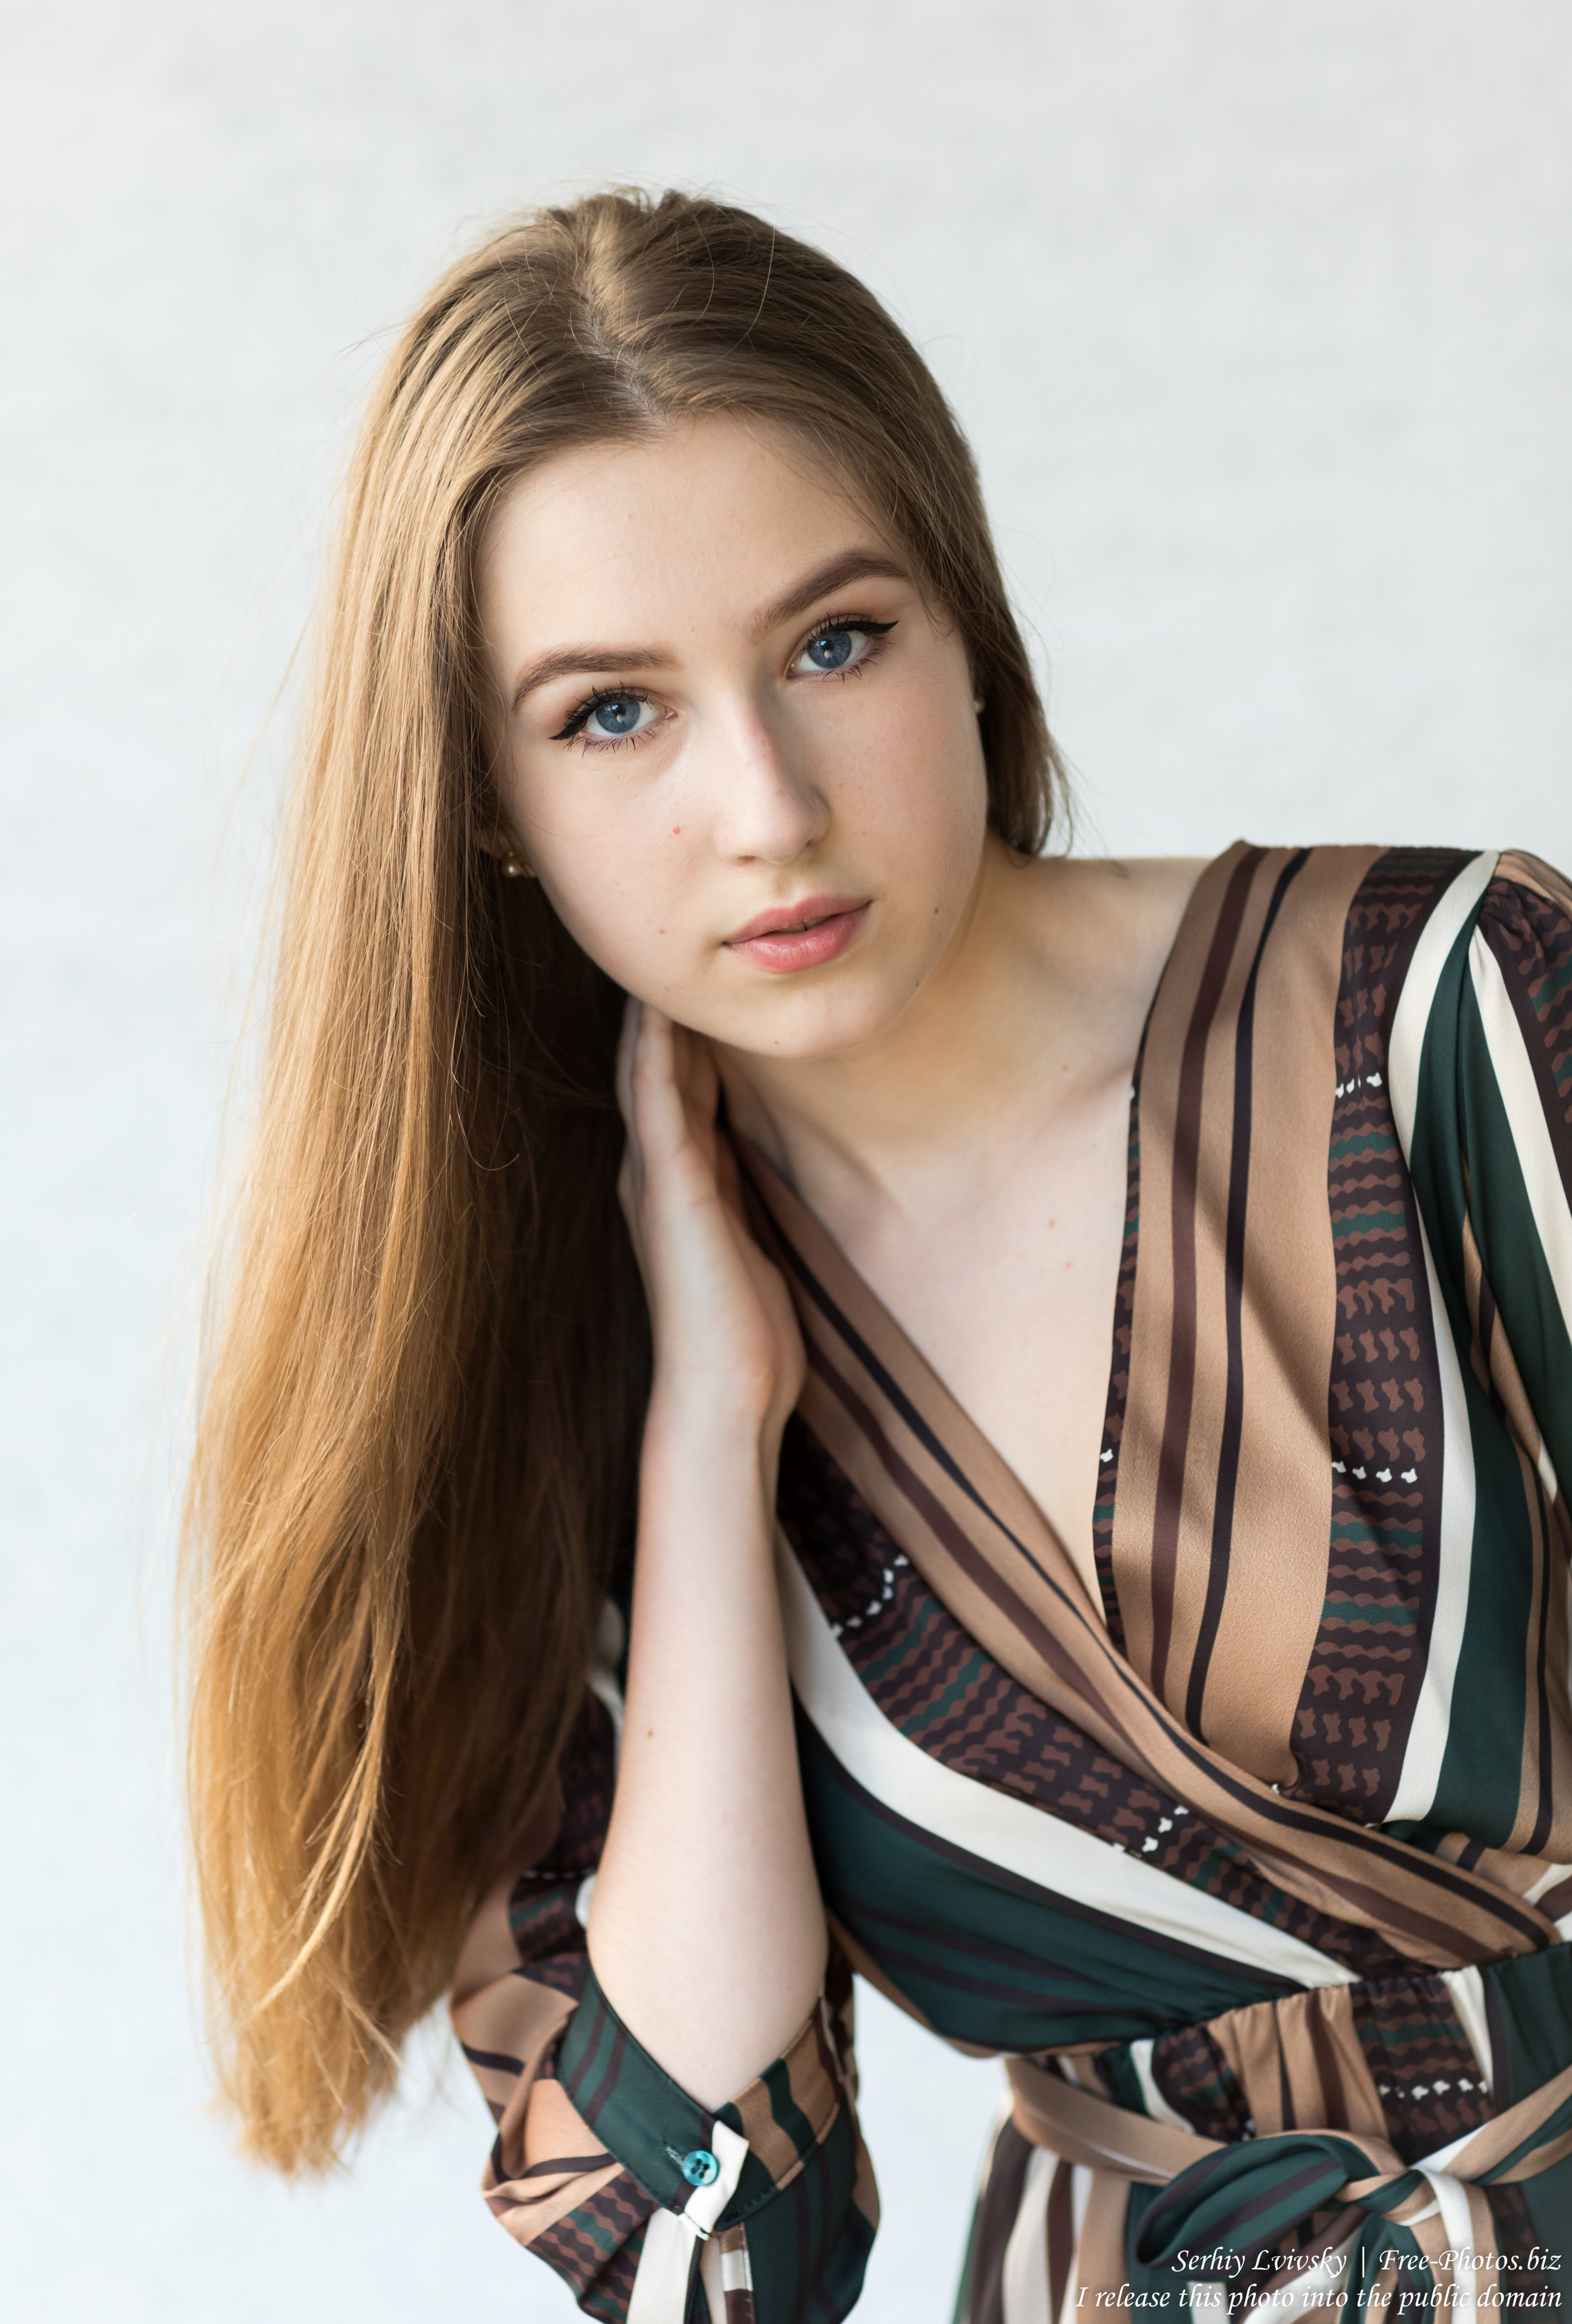 vika_a_17-year-old_girl_with_blue_eyes_and_natural_fair_hair_in_june_2019_by_serhiy_lvivsky_13